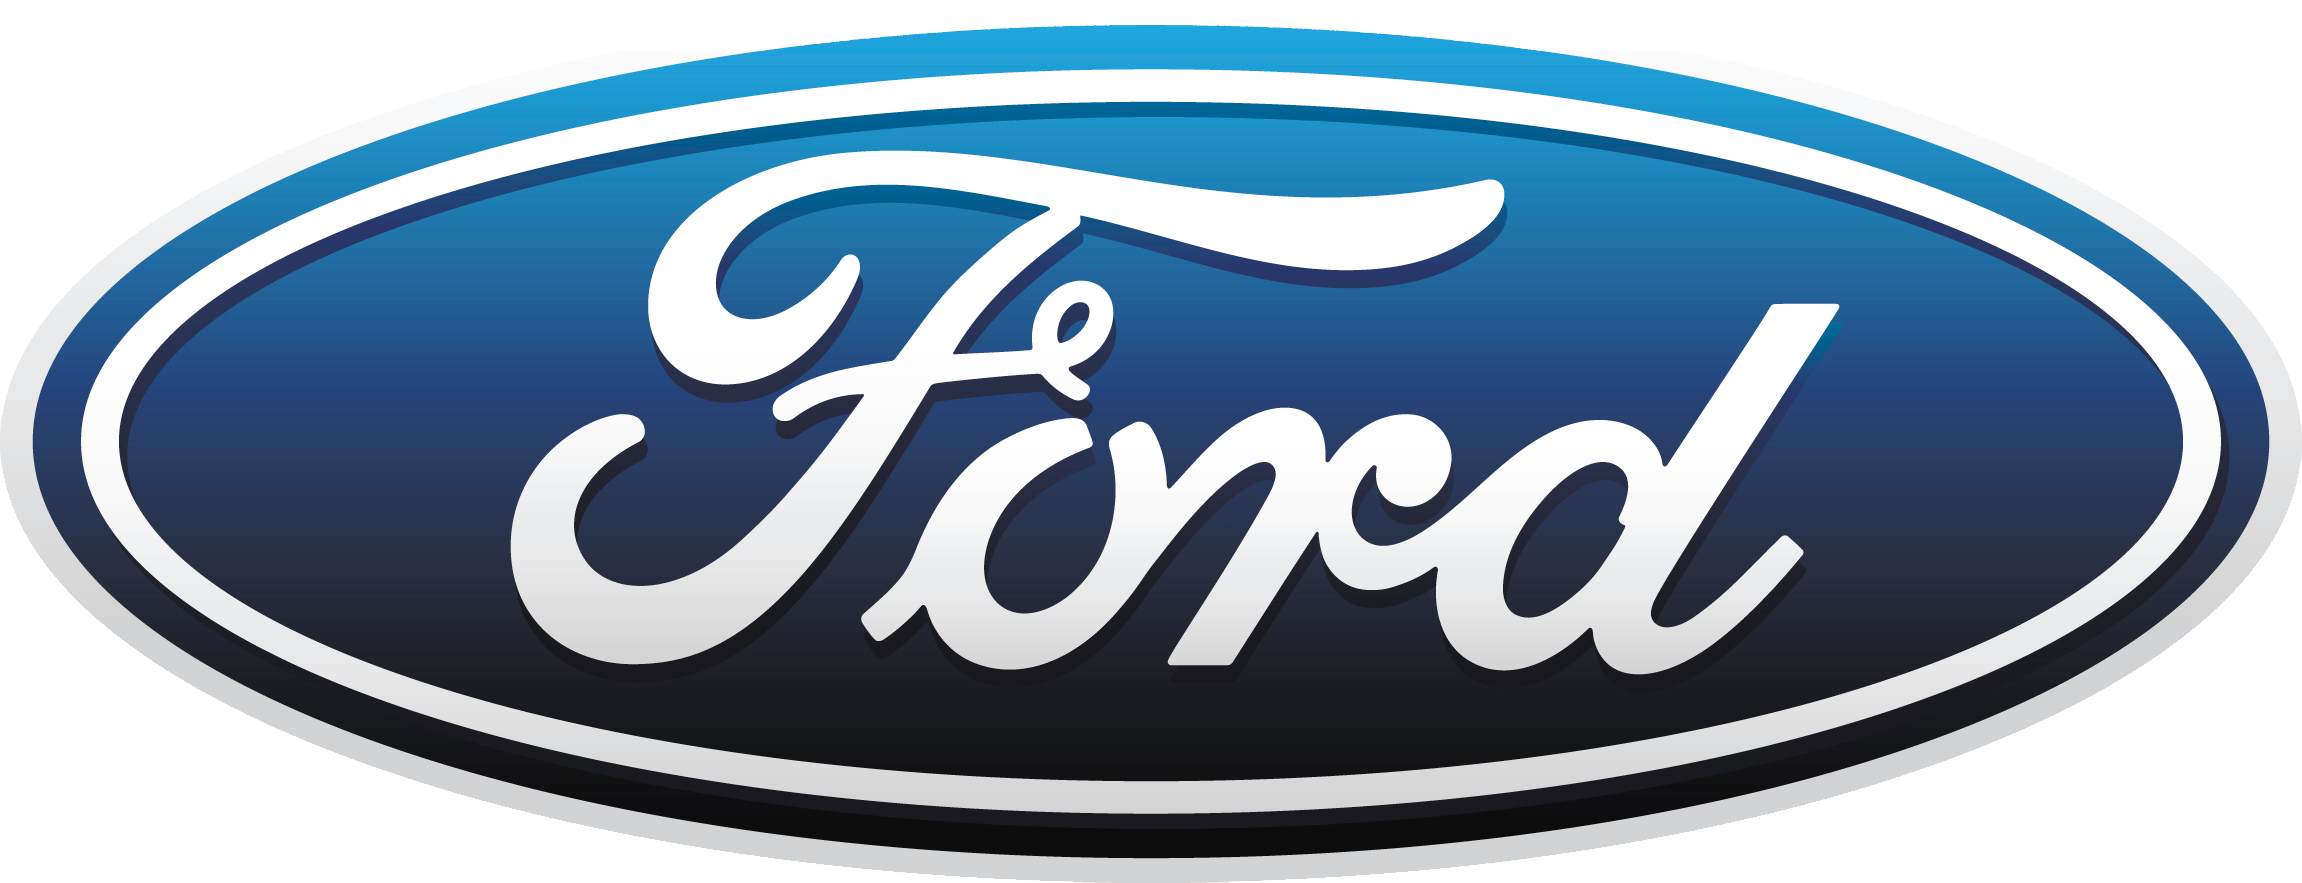 Ford car logo PNG brand image